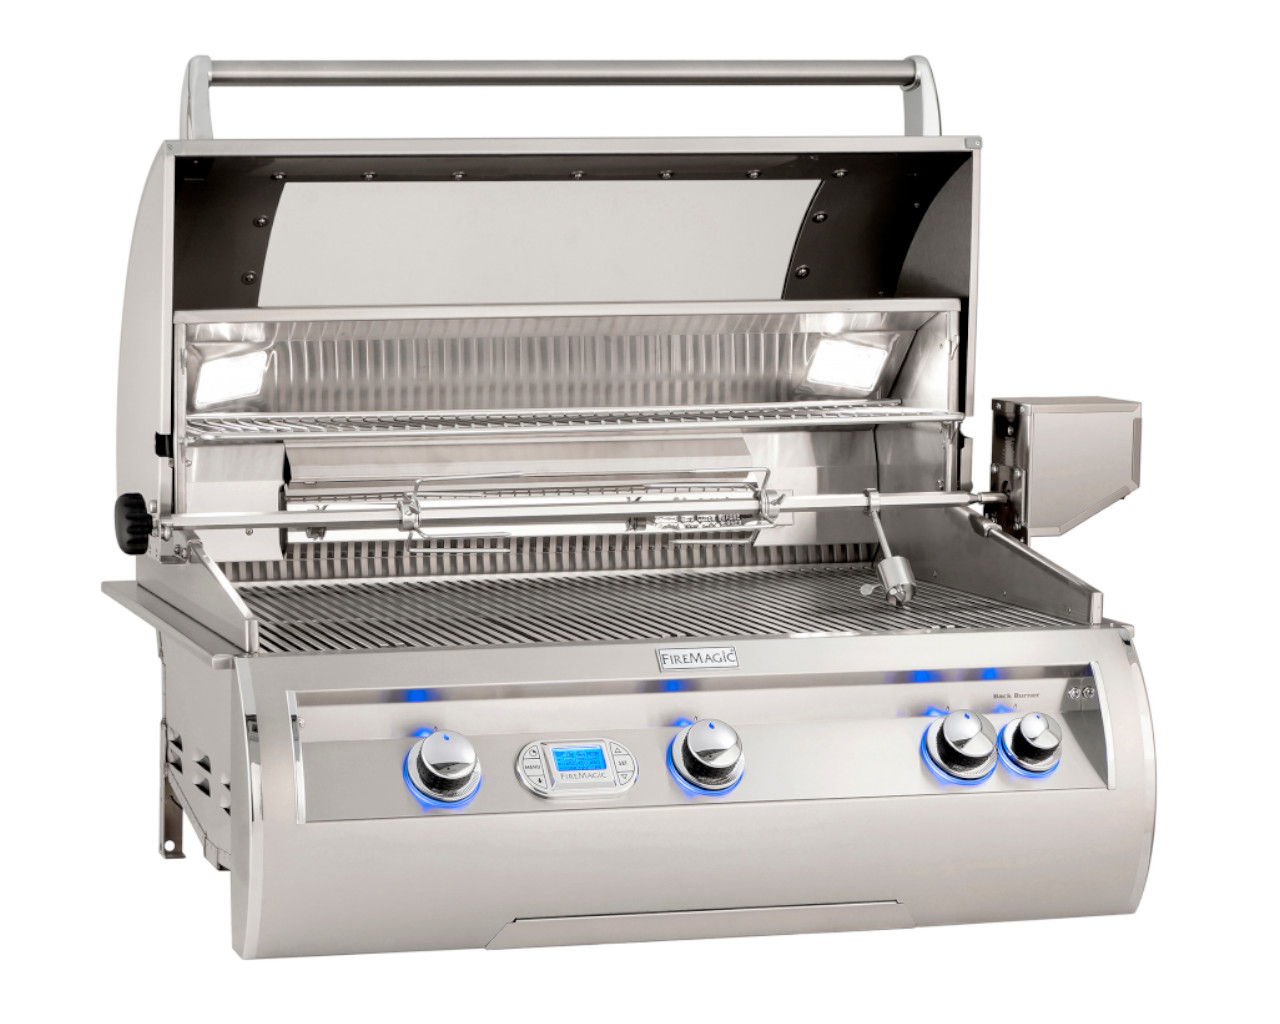 Fire Magic Grills Echelon E790i 3 Burner Built-In BBQ (H Shaped Burners) With Digital Thermometer And Magic Window, , hi-res image number null